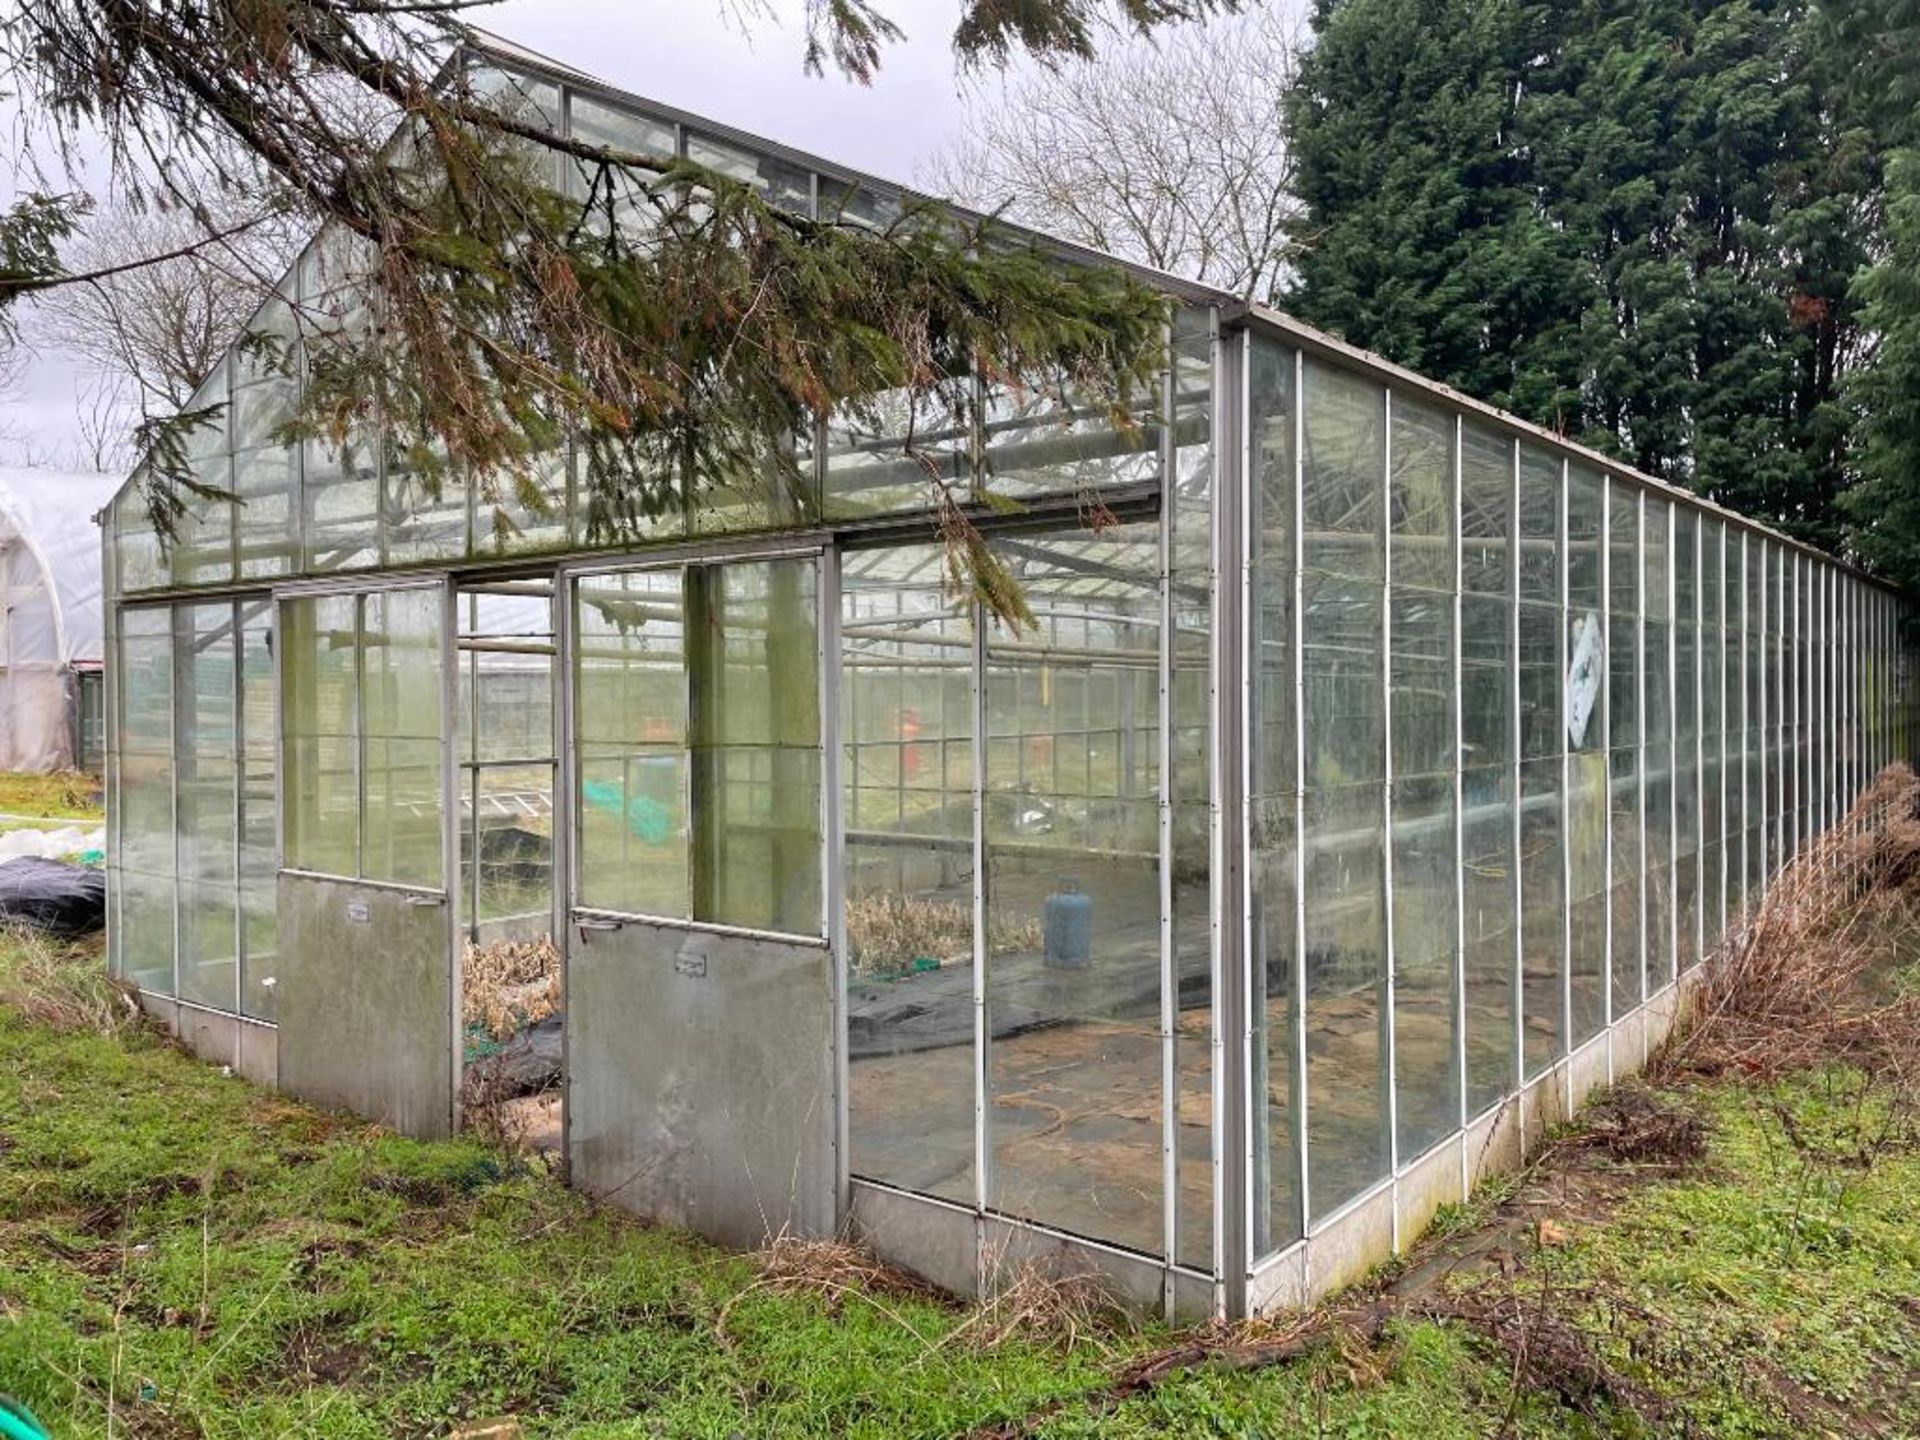 Robinson 6.6m x 20m glasshouse with manual opening vents. Sold in situ, buyer to remove